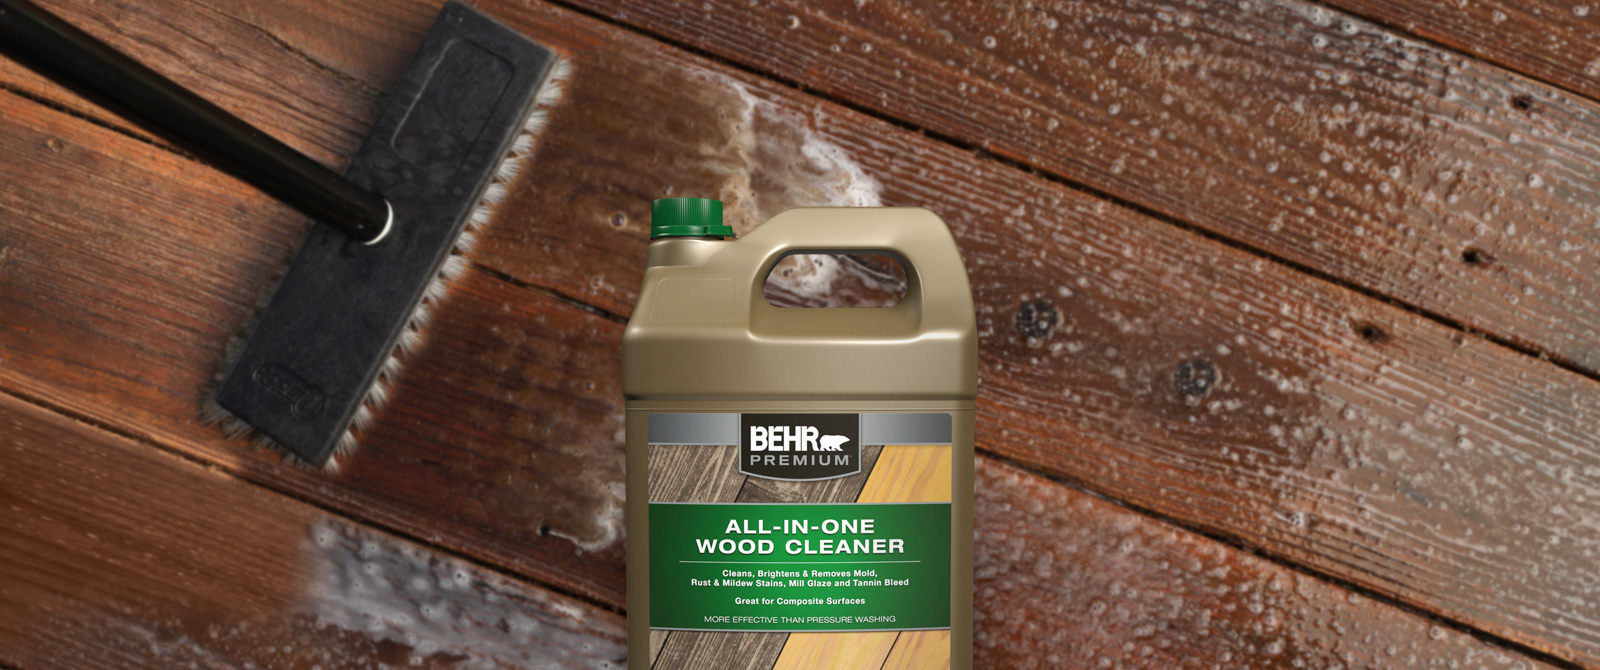 See all BEHR Cleaner product - BEHR Premium All-in-one Wood Cleaner